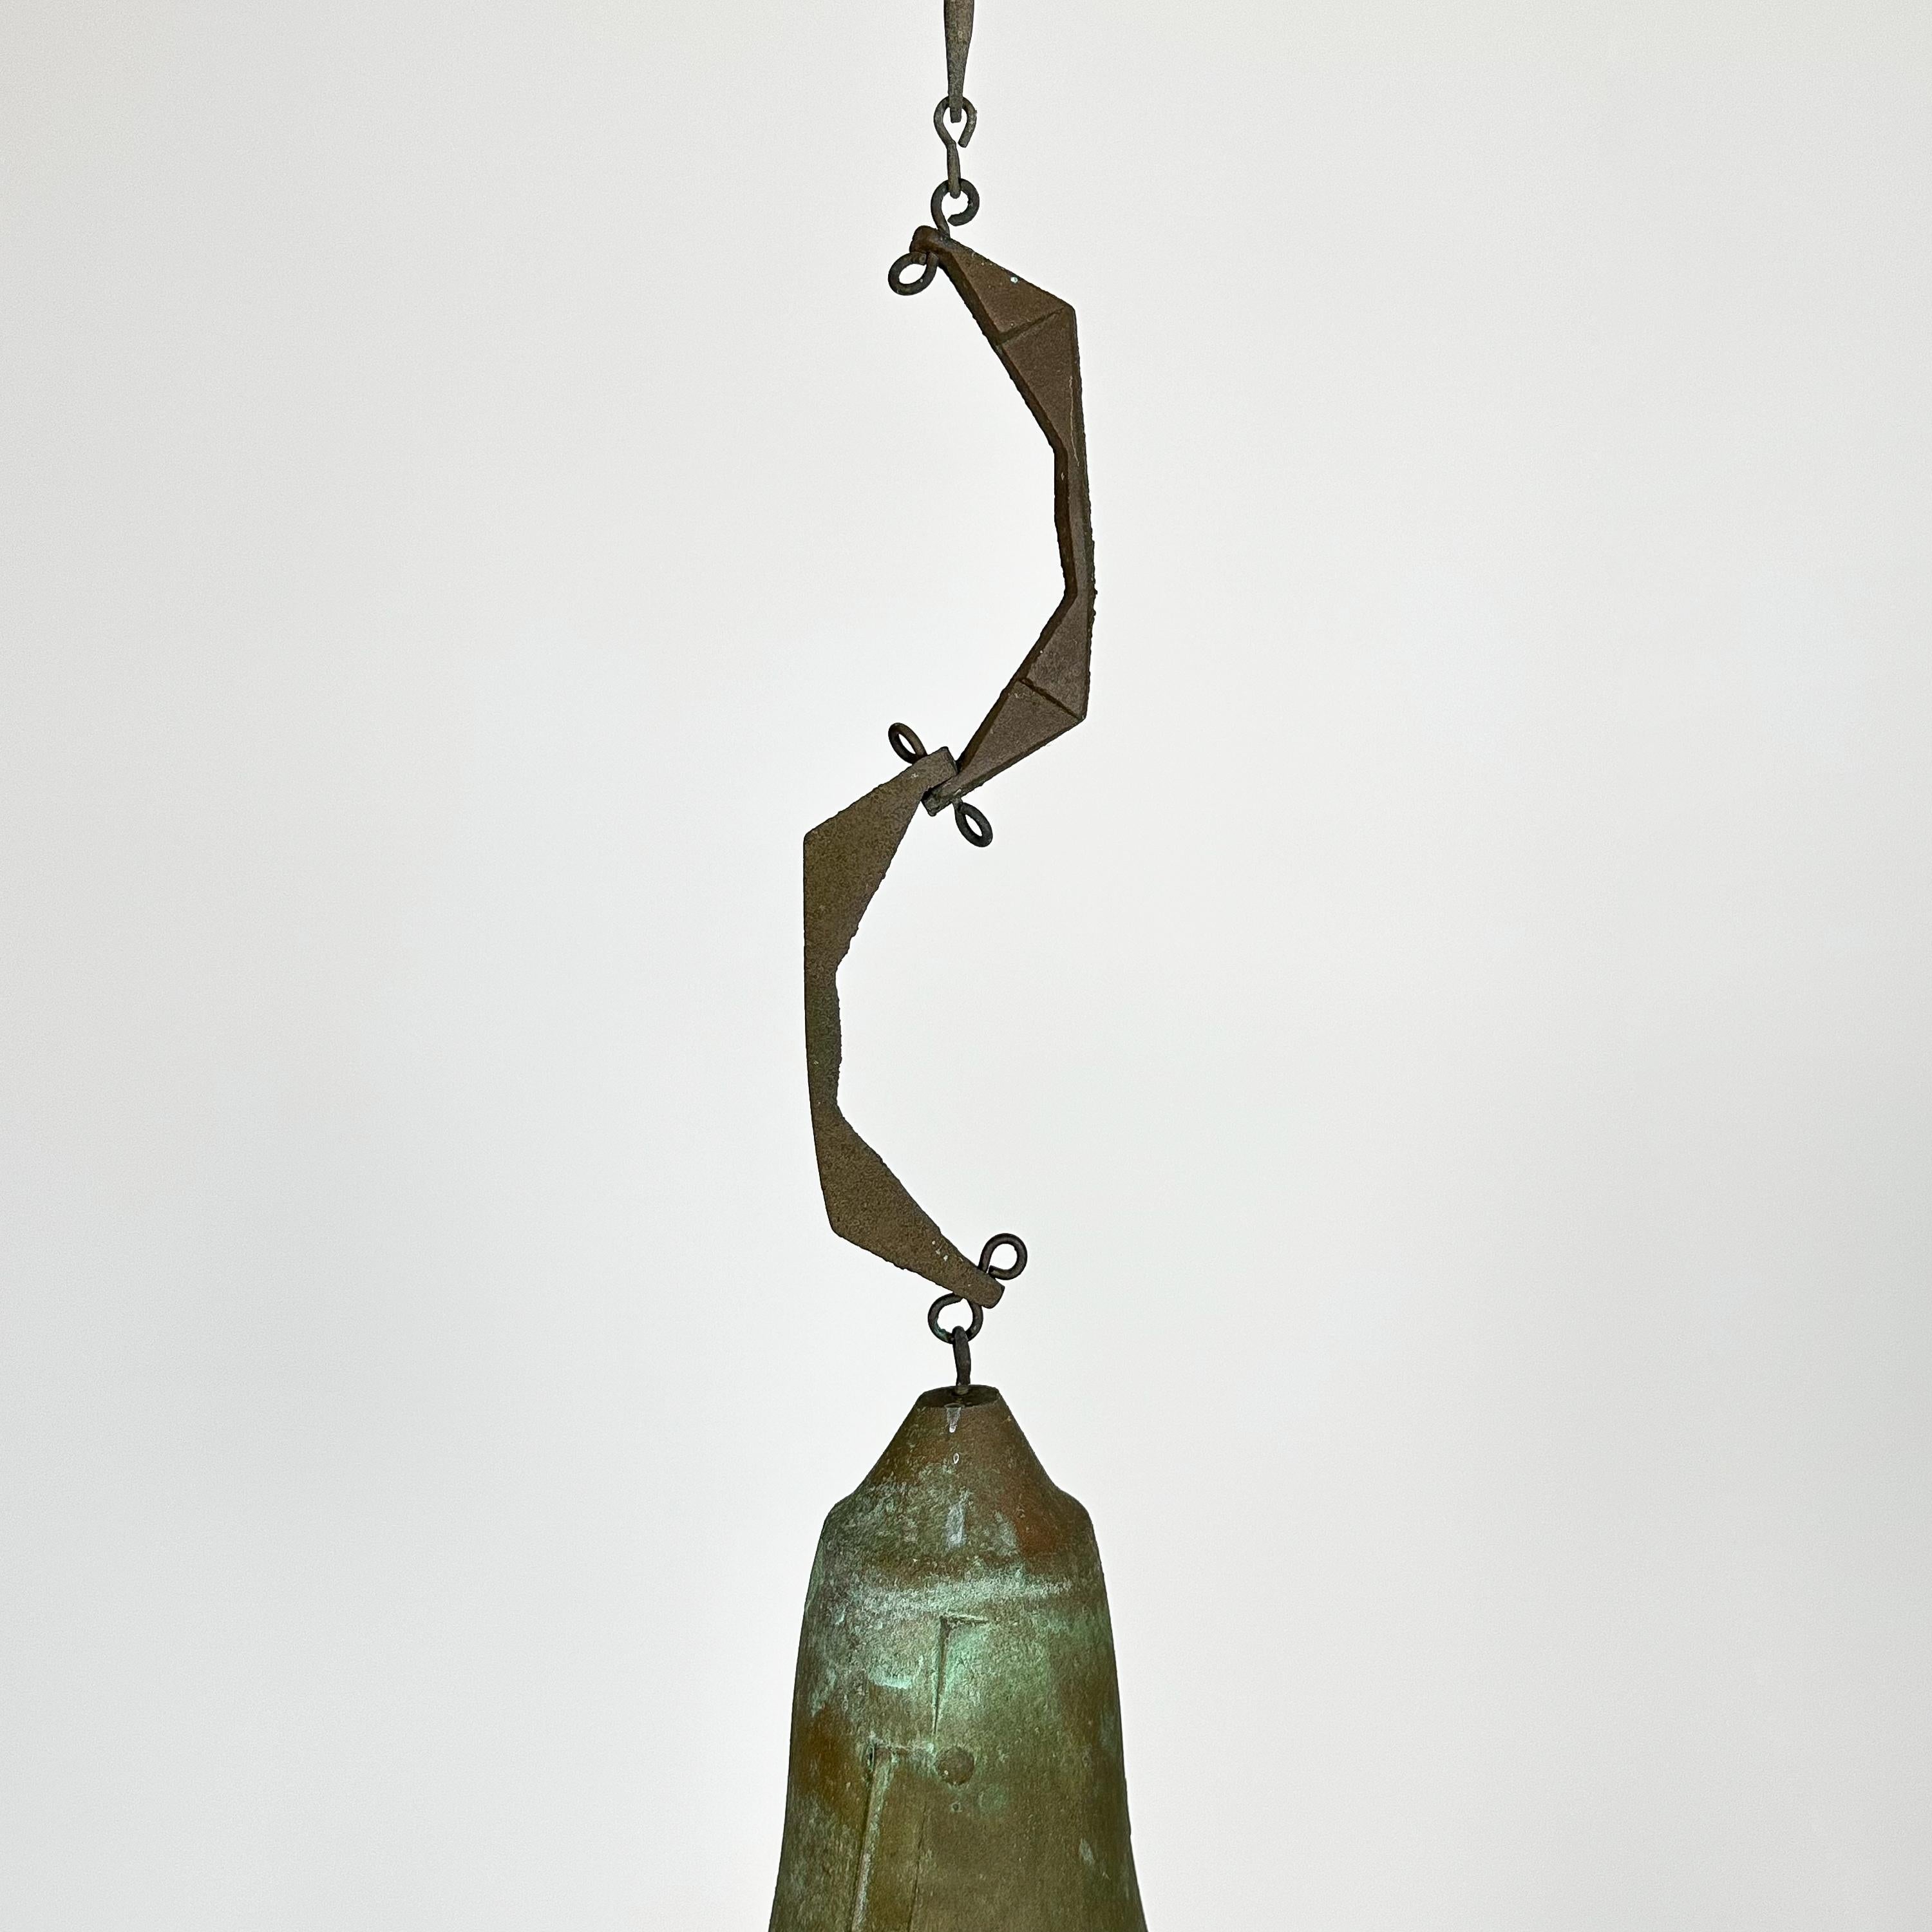 Cast Mid-Century Bronze Bell / Wind Chime by Paolo Soleri for Arcosanti 